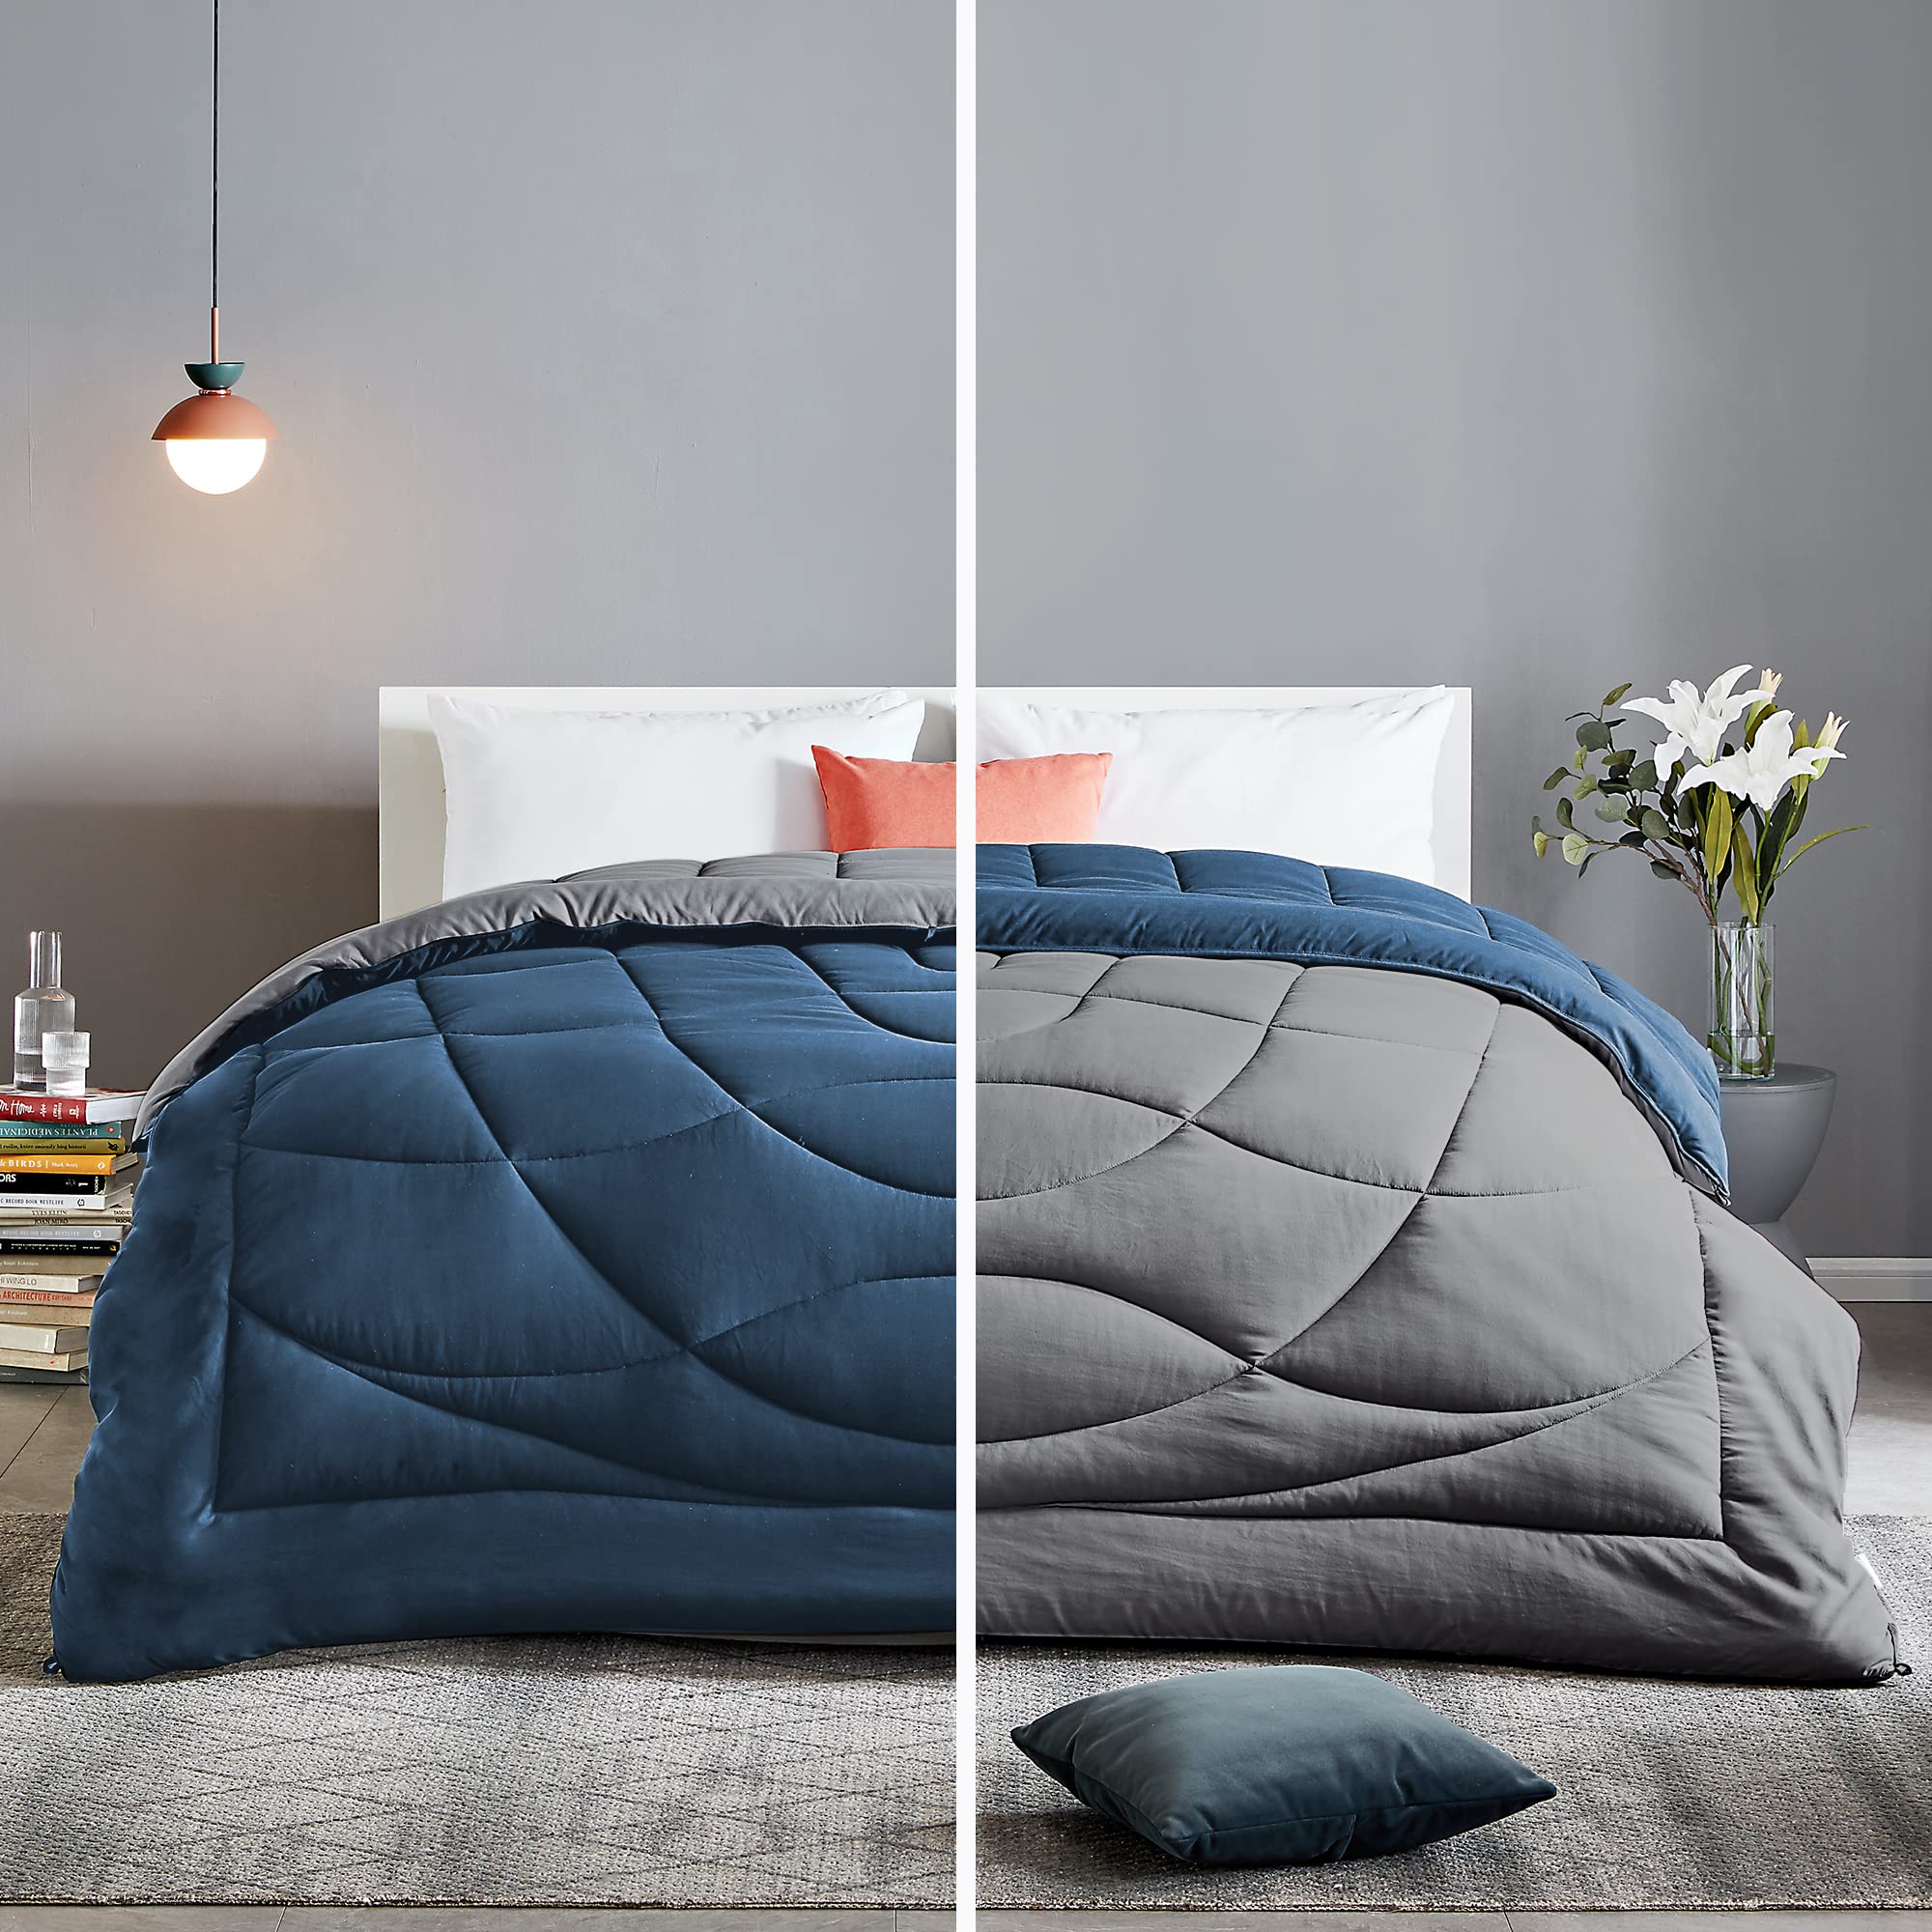 Book Cover SLEEP ZONE Reversible Queen Size Cooling Comforter, Soft Breathable Bedding Down Alternative Comforter Warm for All Seasons, A Side Navy + B Side Grey U-shape Quilting Navy & Dark Grey Queen (88x88 inch)